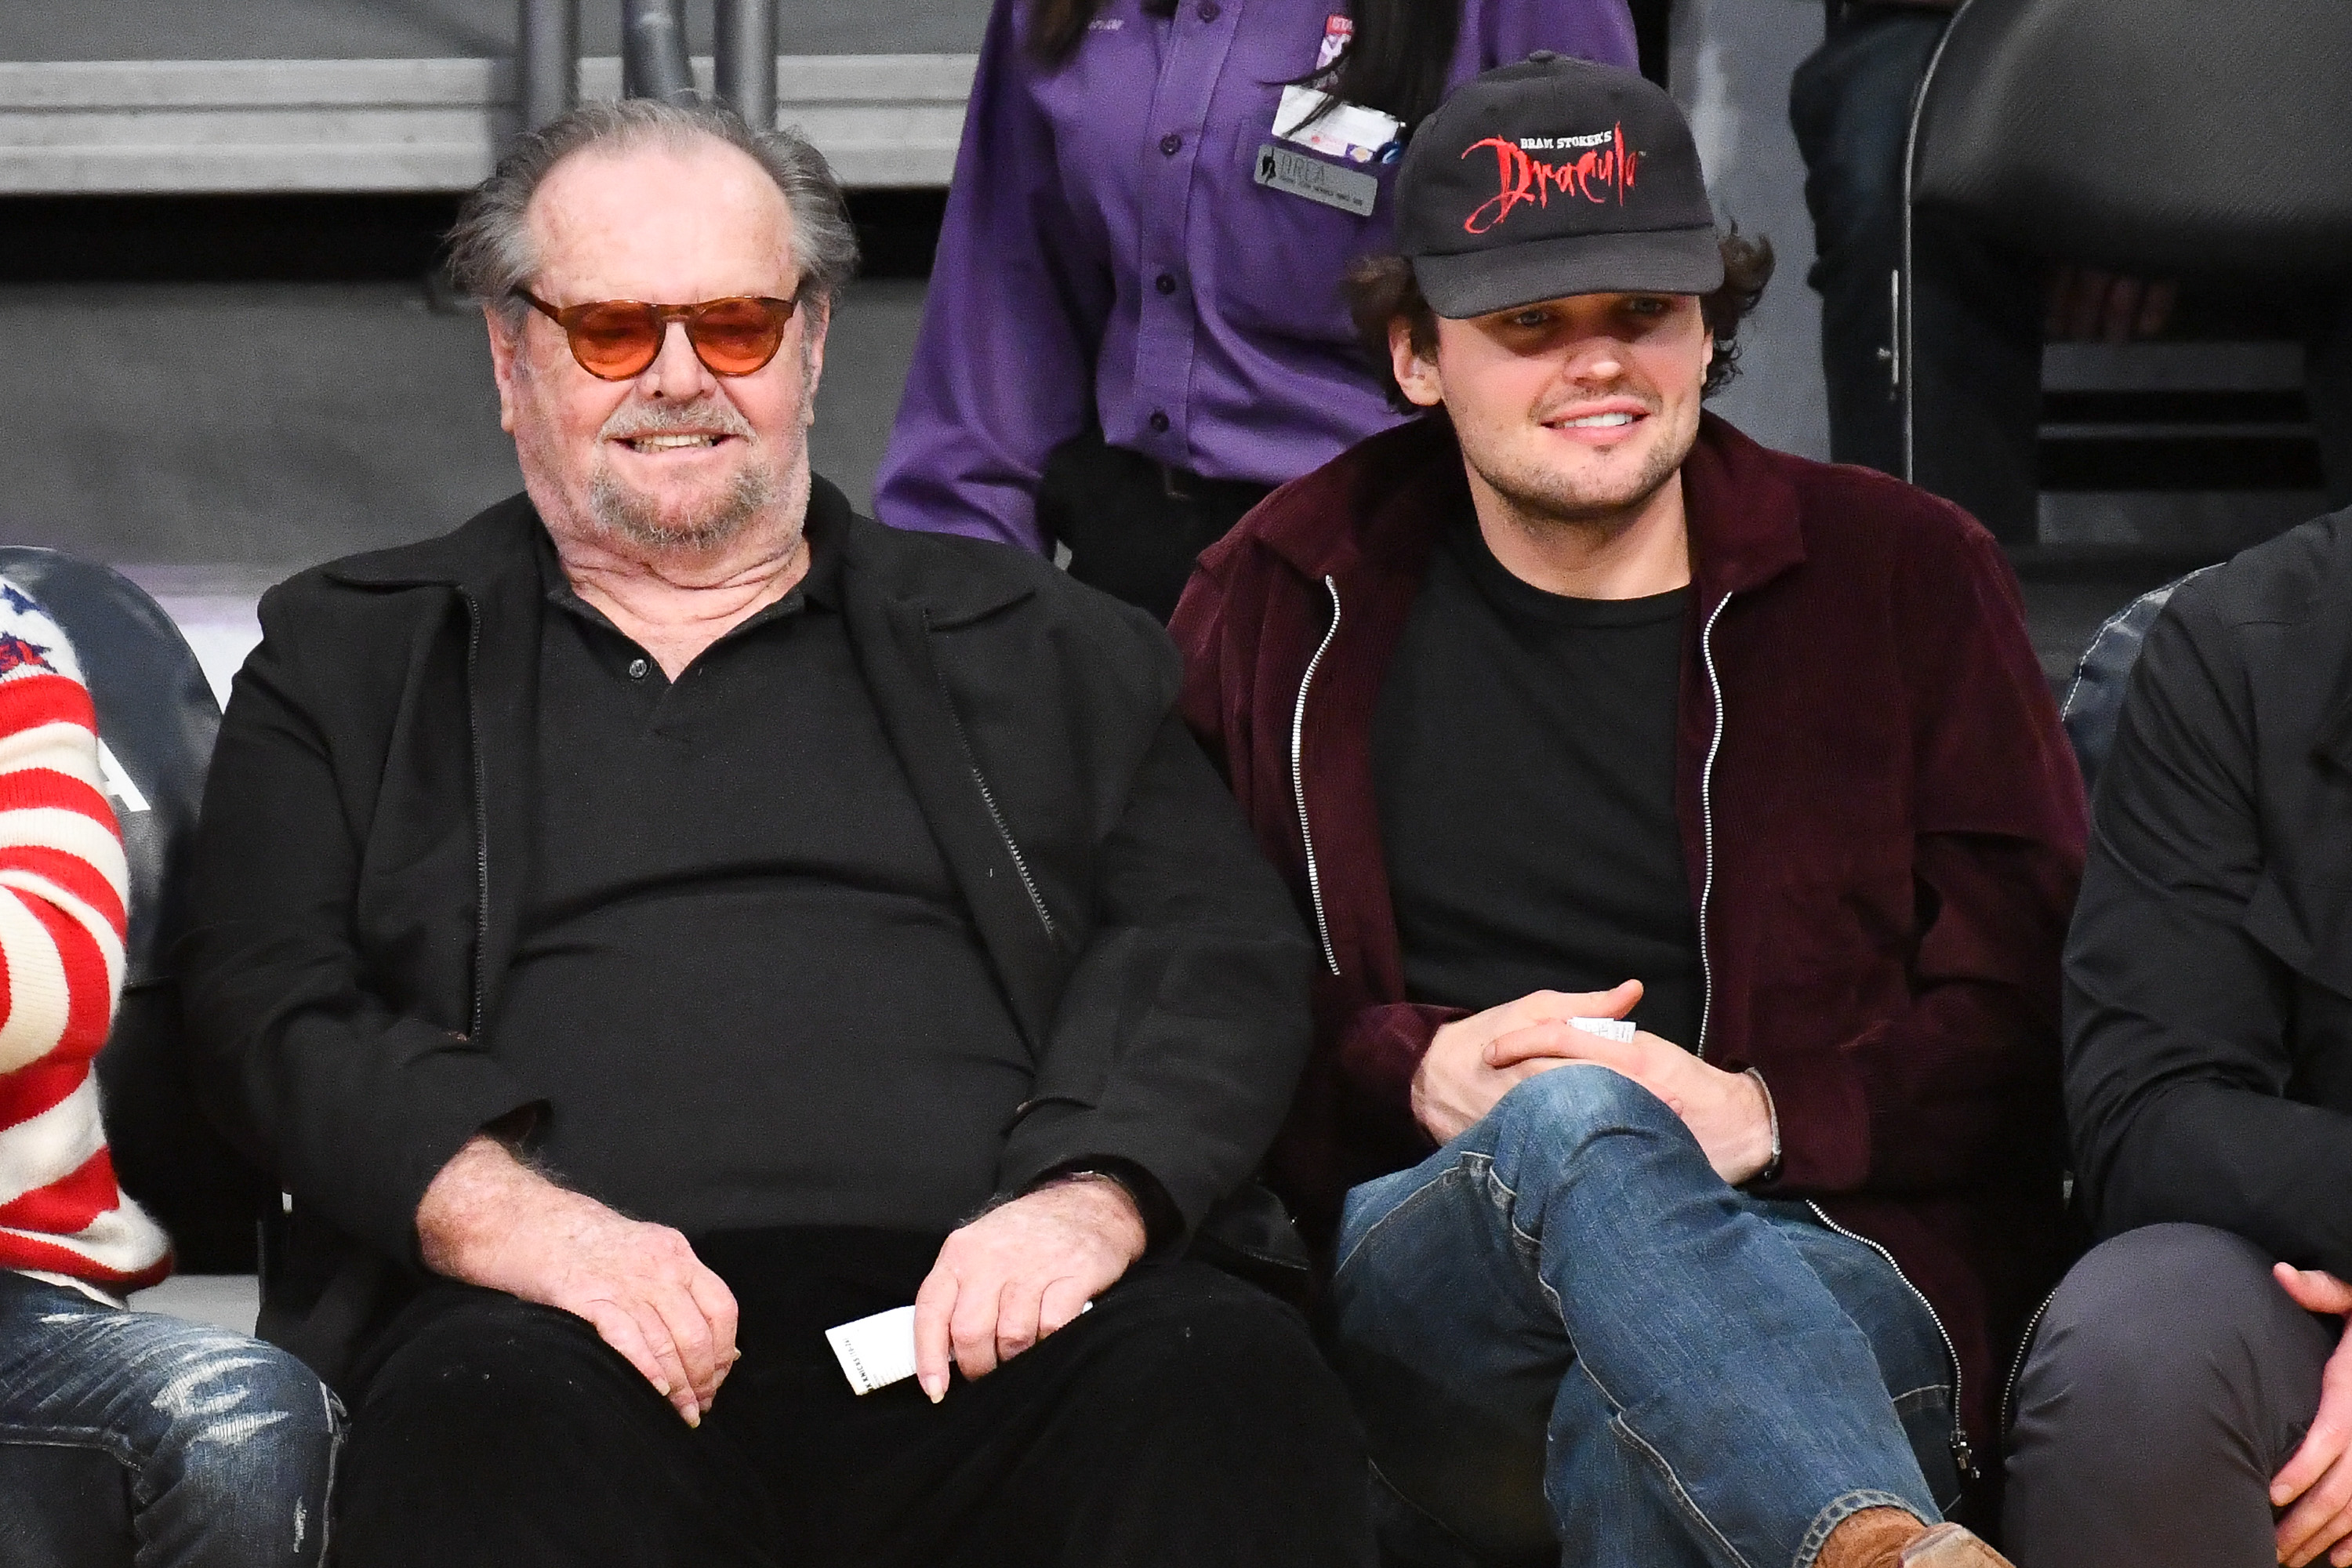 Jack Nicholson and his son Ray in California in 2020 | Source: Getty Images